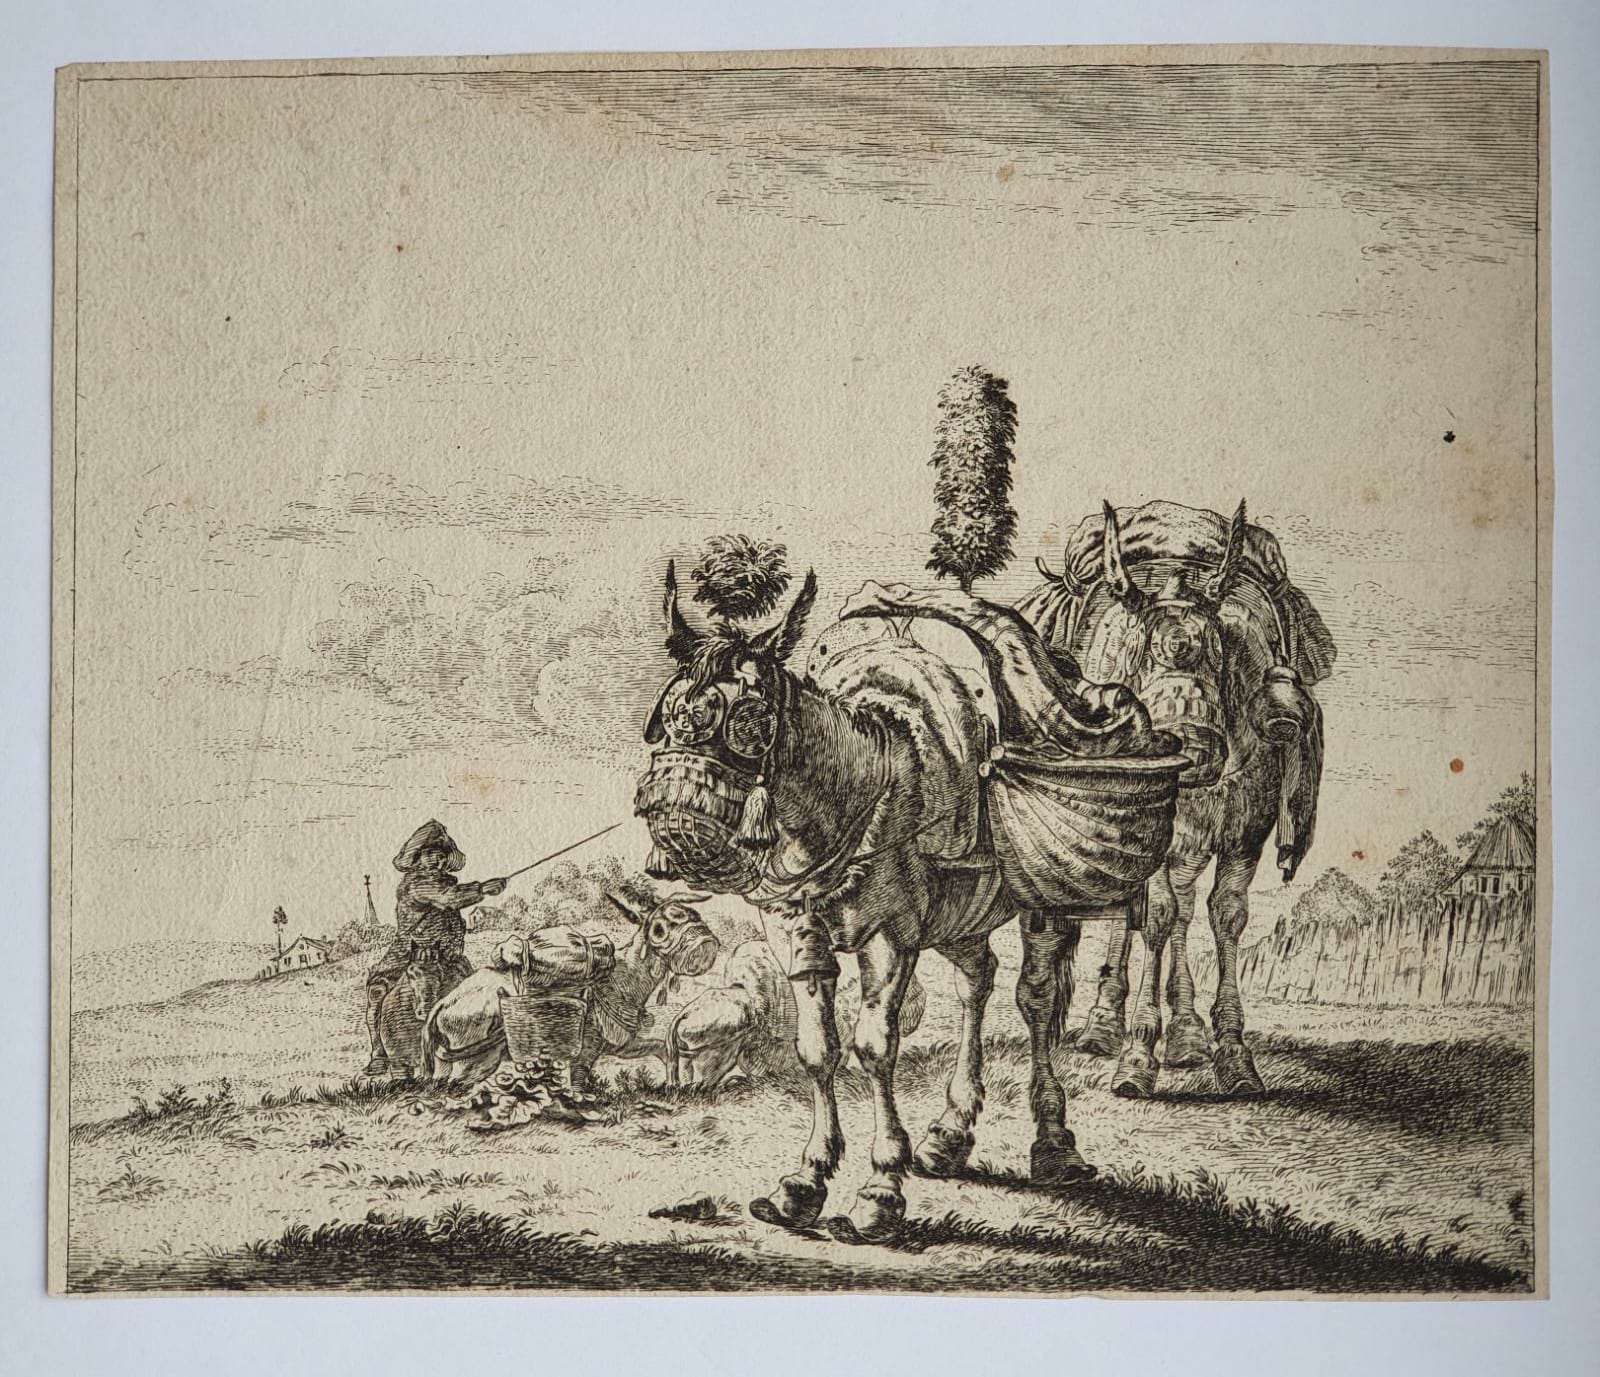 [Antique etching, ets] After K. Dujardin, The two mules, published before 1750.